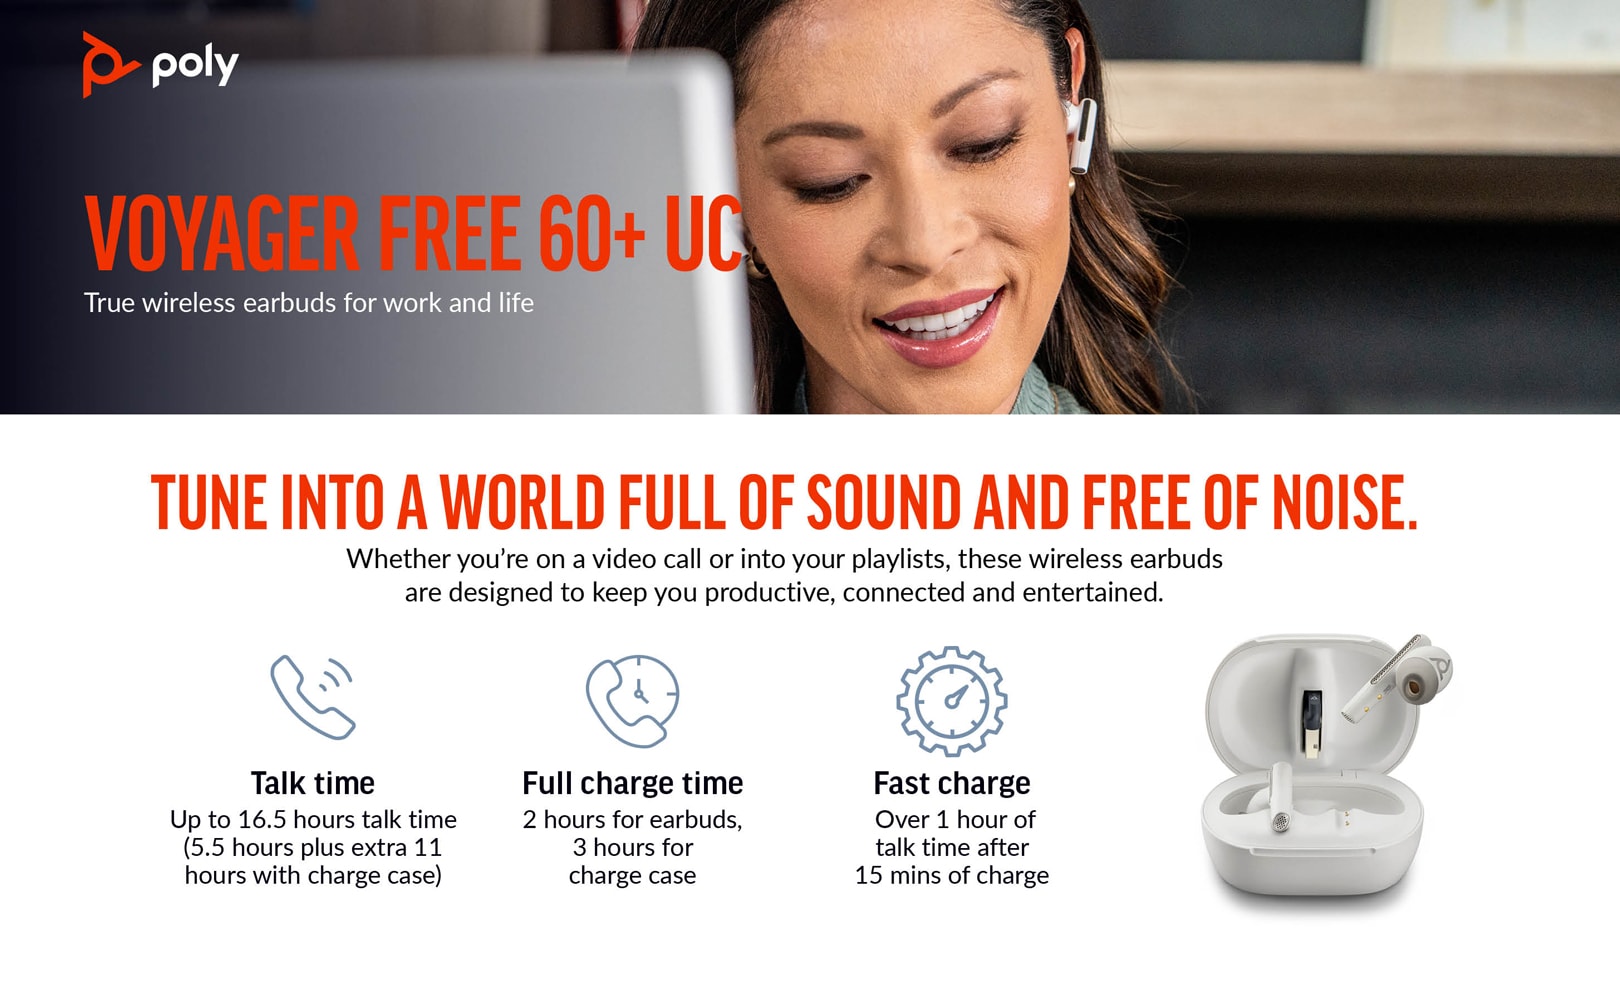 Touchscreen A Sand Earbuds, Voyager Case Poly BT700 60+ Free adapter, White USB Charge UC